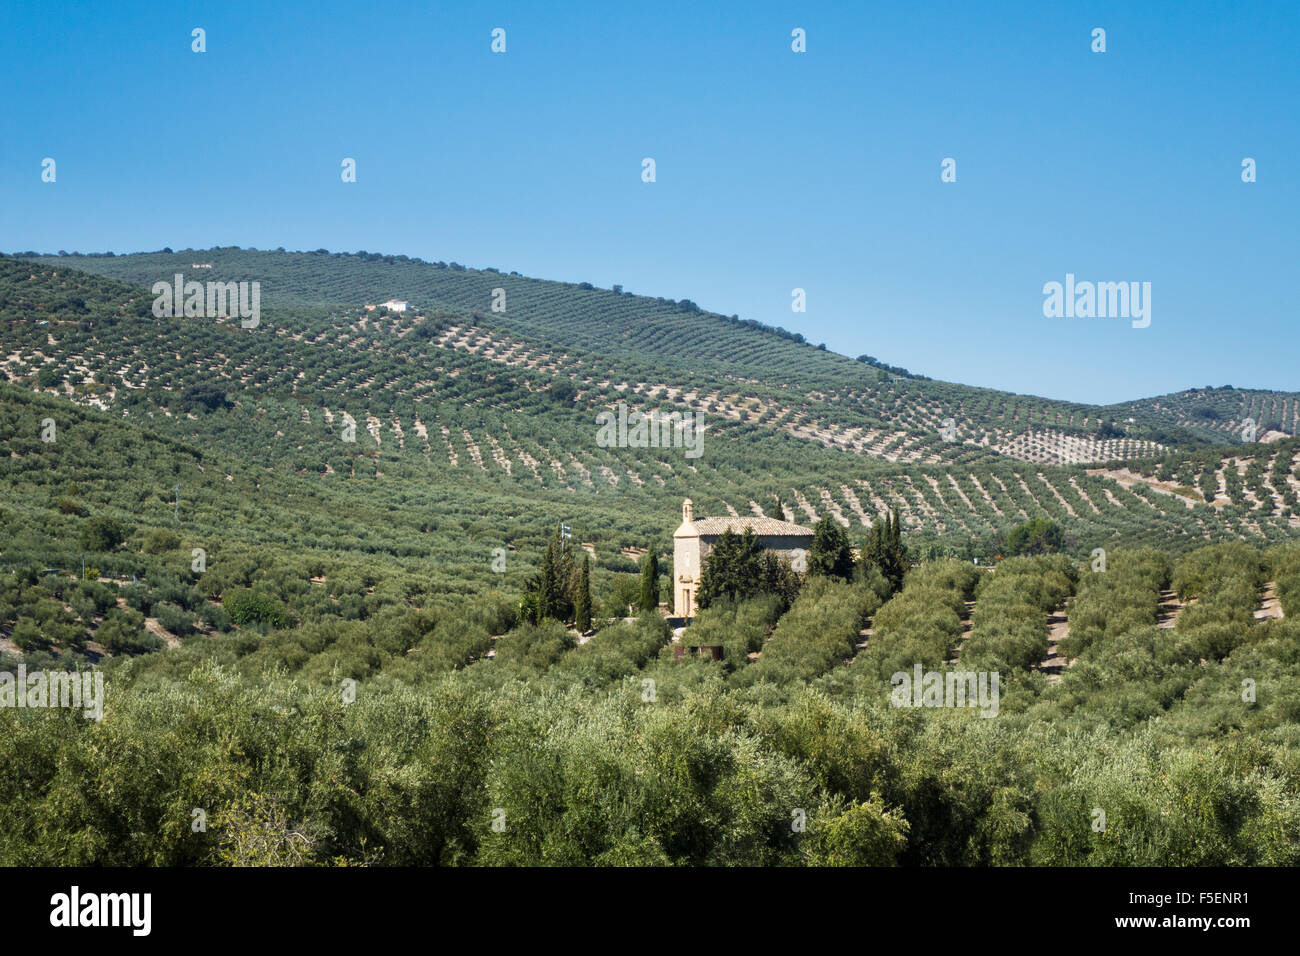 Olive trees on hills and mountain sides in Andalucia in Southern Spain Stock Photo